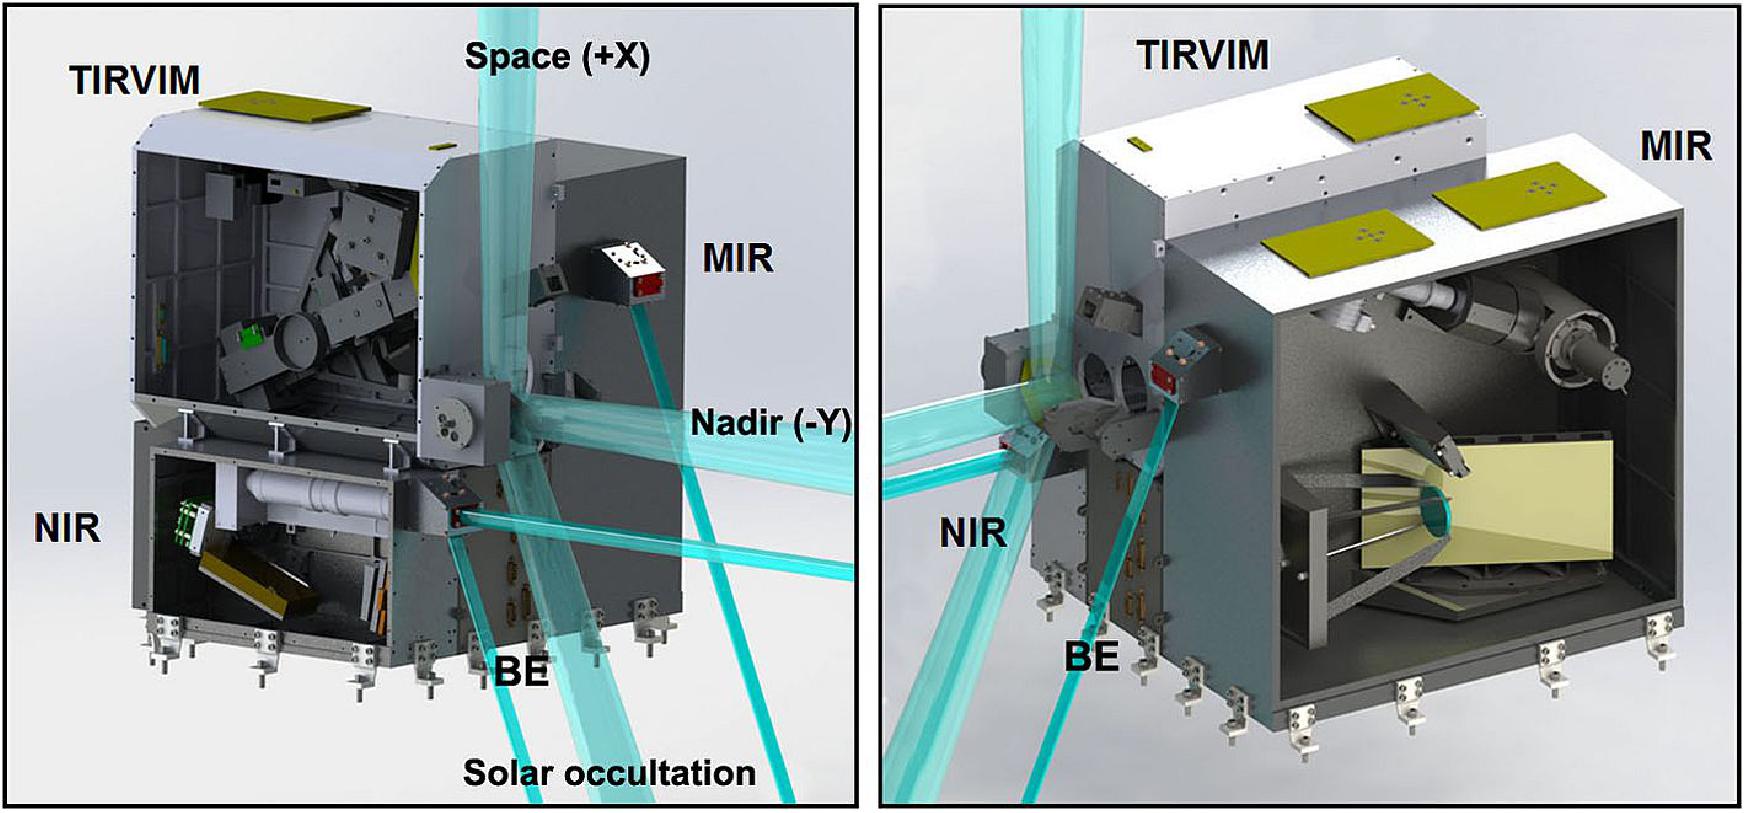 Figure 133: The concept design of ACS. Suite consists of four blocks: the NIR channel, the MIR channel, the TIRVIM channel, and the electronic block. The yellow blocks designate the instrument’s radiators. The pointing directions of the ACS channels are shown (image credit: IKI)